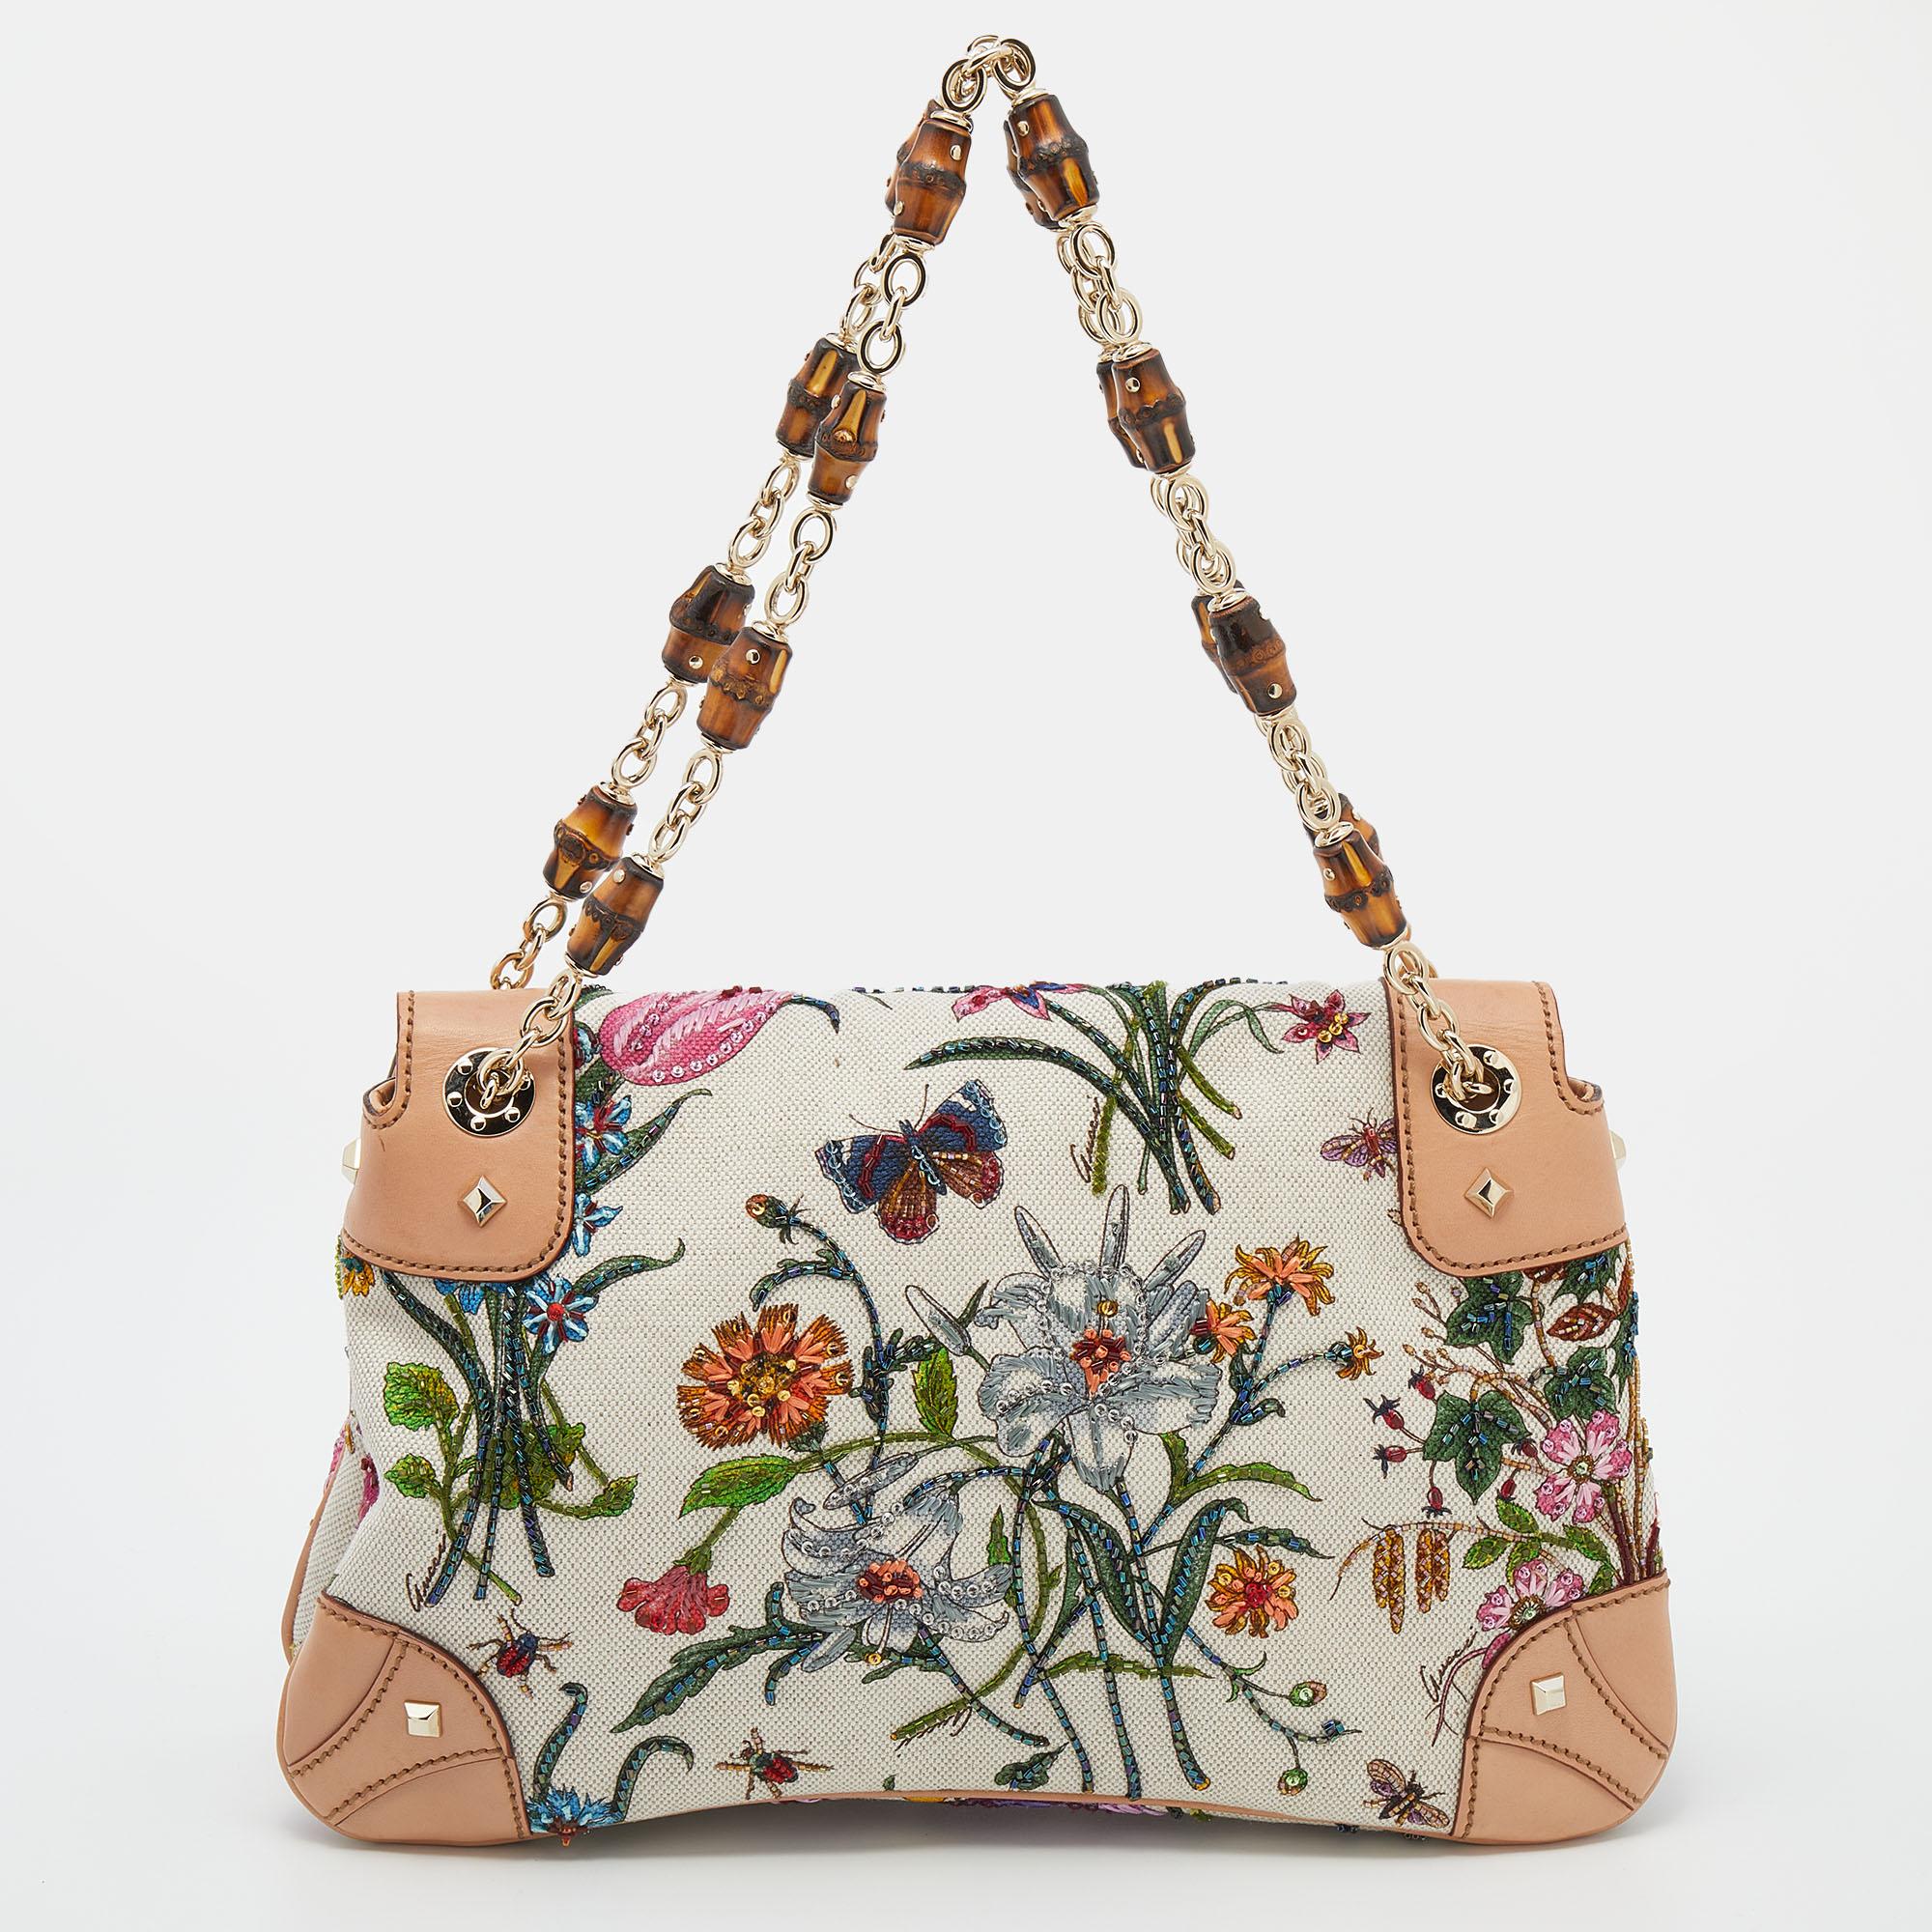 From the Spring/Summer 2013 collection comes this Gucci Bamboo shoulder bag, it's made from floral printed canvas with leather trims and has dual beaded handles. The flap bamboo closure opens to a spacious interior.

Includes: Info Booklet, Original